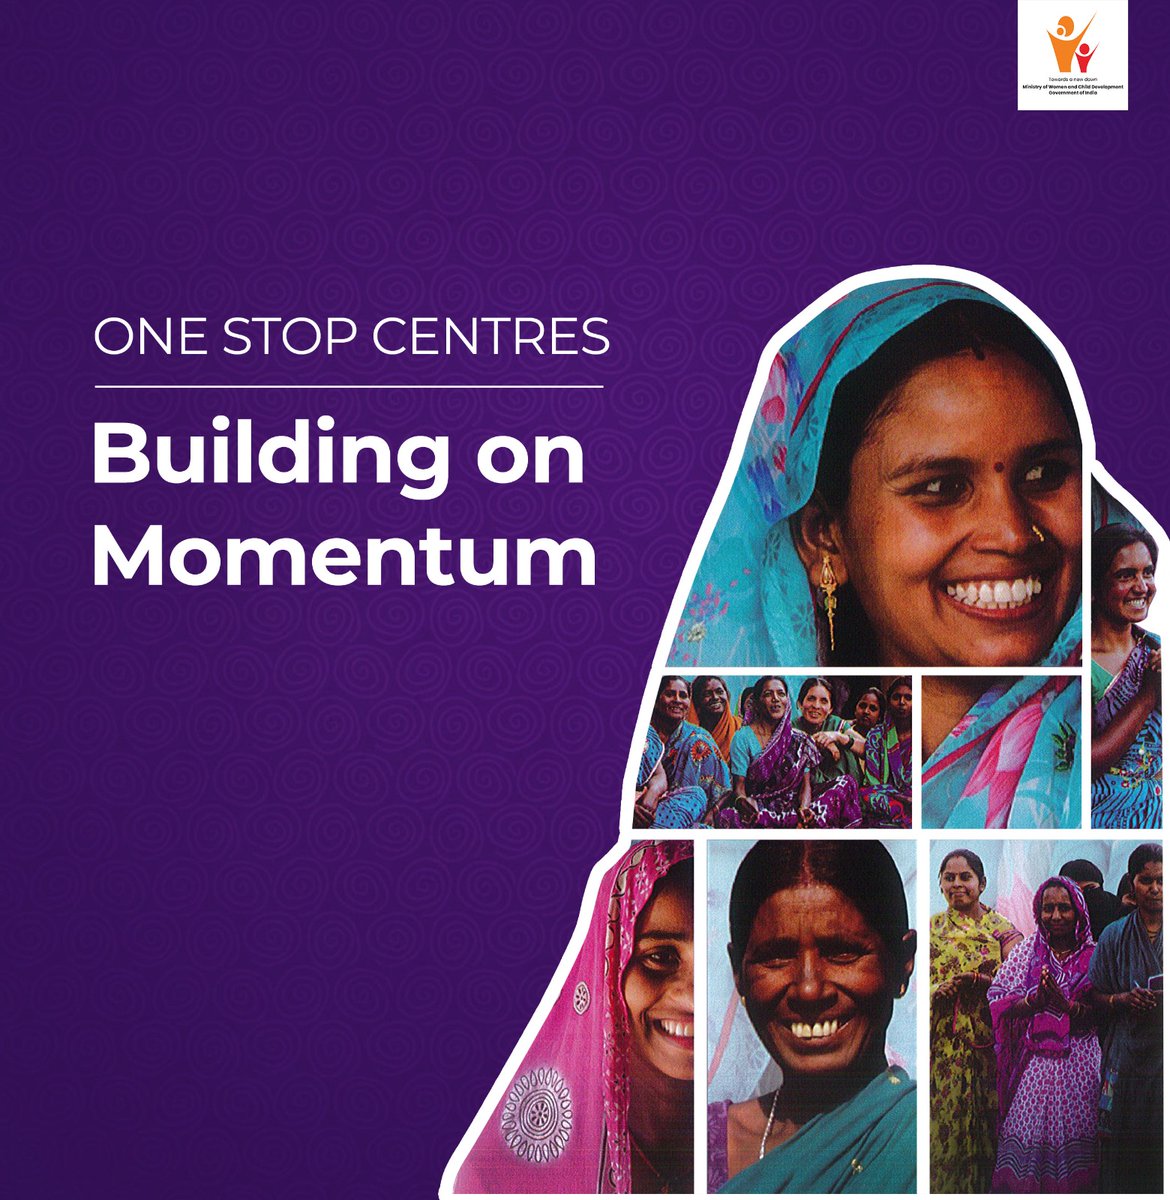 One Stop Centre: Empowering Women, Ensuring Safety! One Stop Centre offers a lifeline to violence survivors, fostering a secure and supportive environment! . . #MissionShakti #OSC #narishakti @PIBWCD